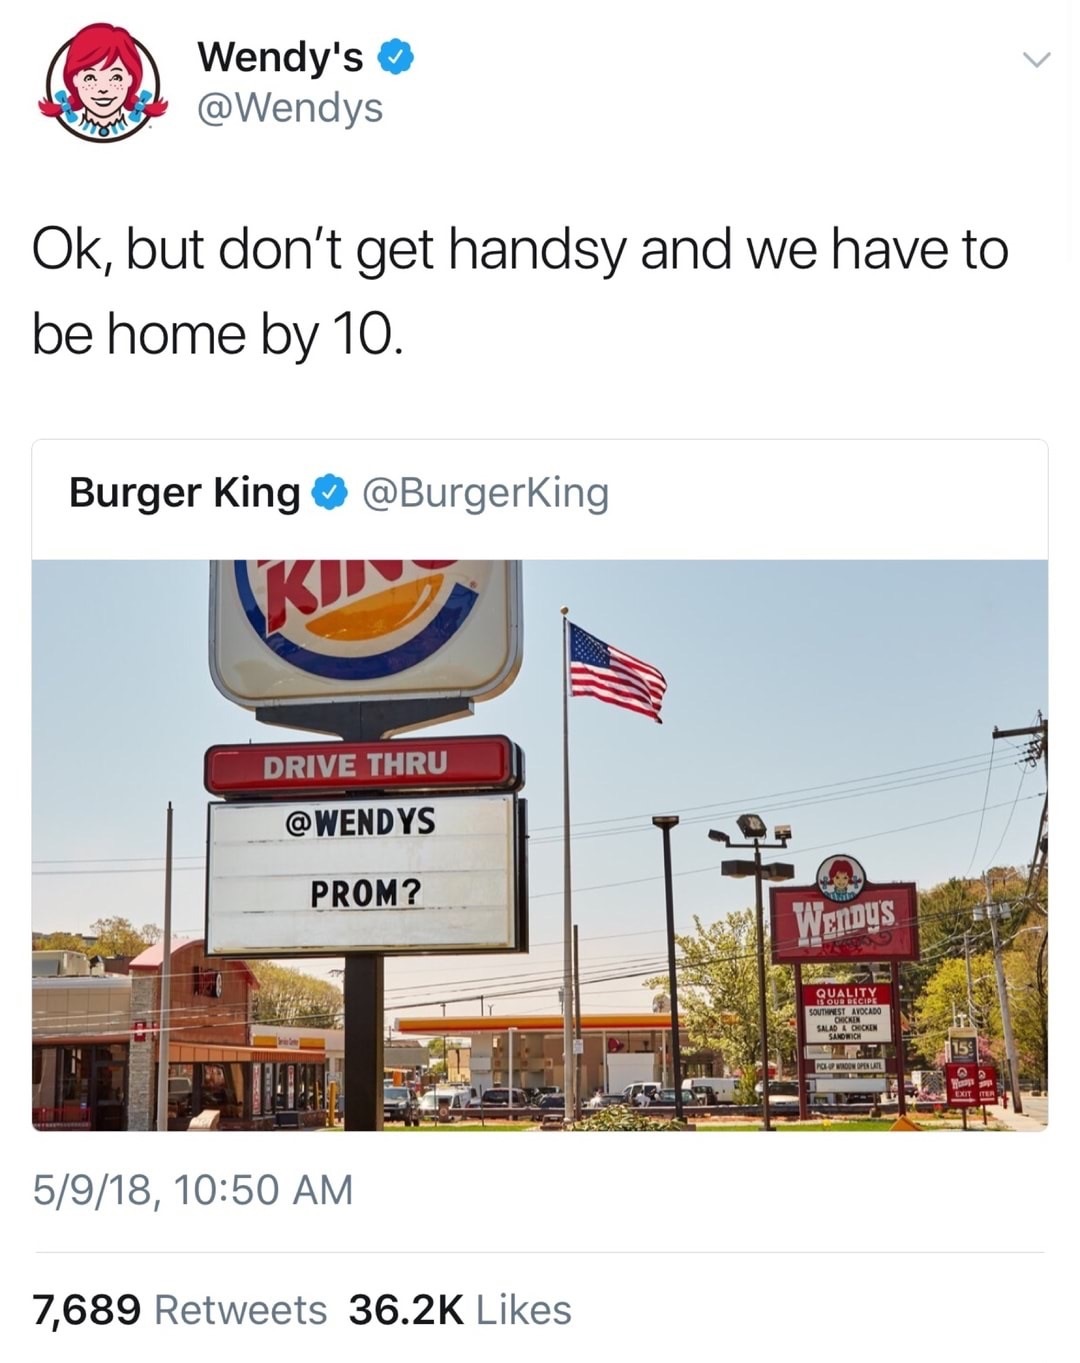 Wendy's accepts Burger Kings invite to the prom.